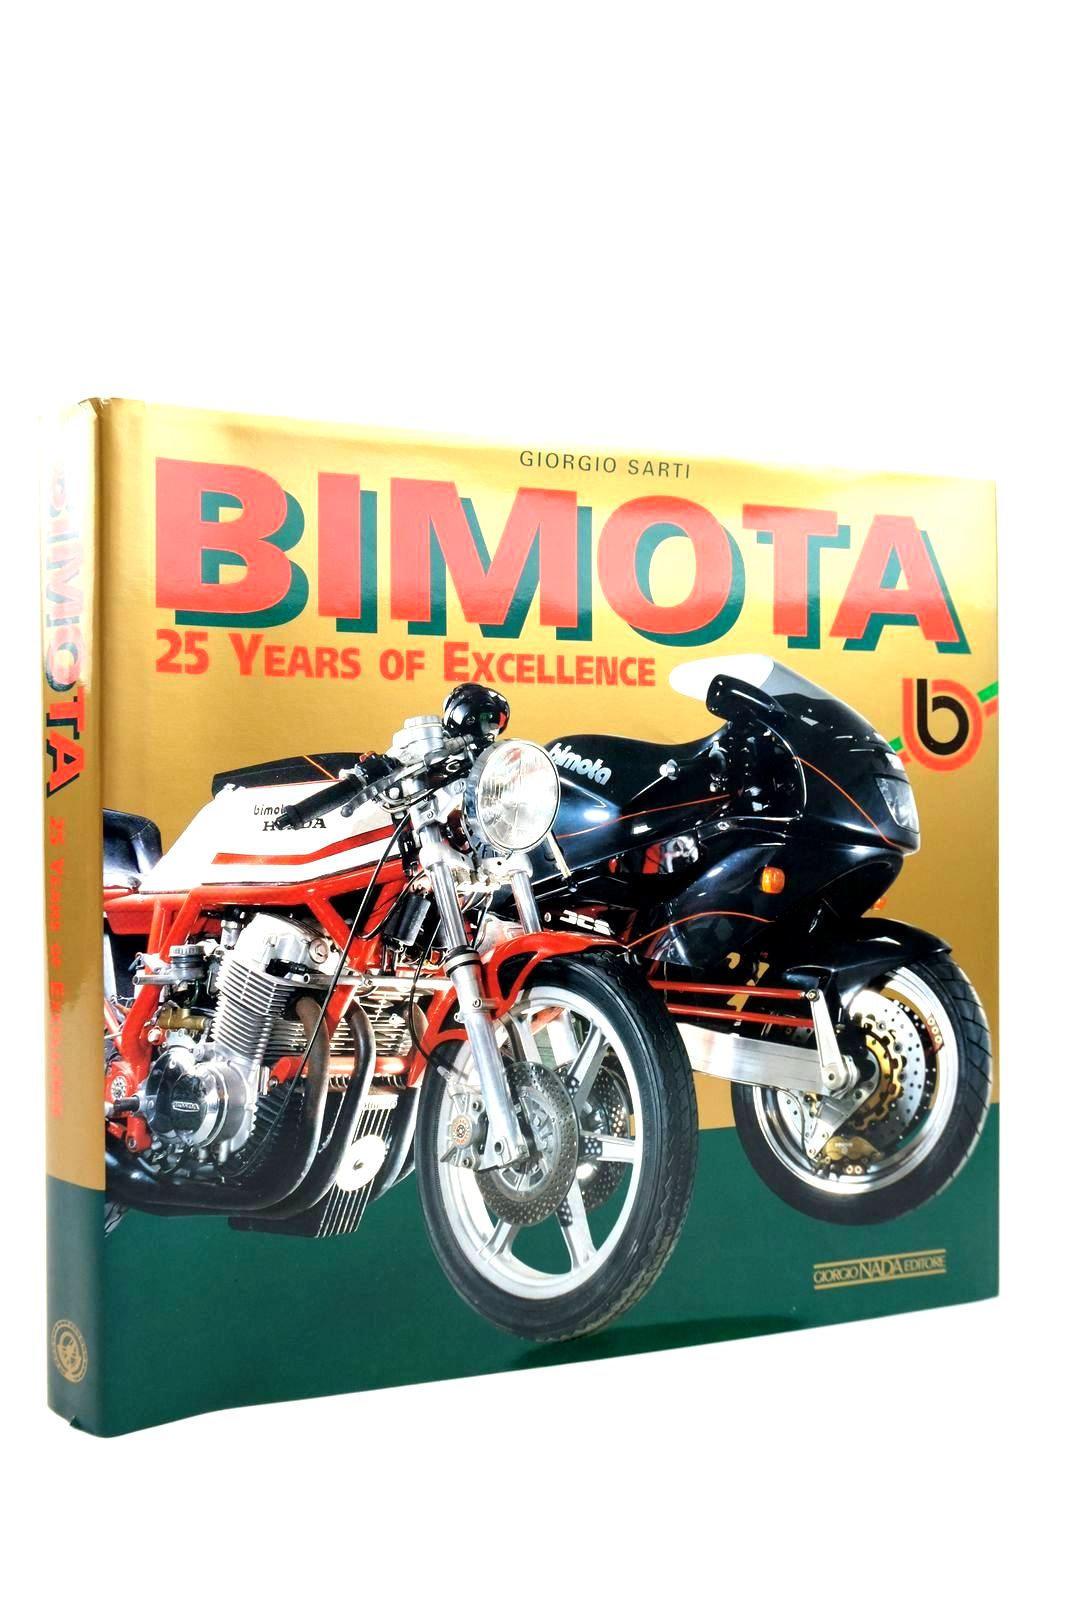 Photo of BIMOTA: 25 YEARS OF EXCELLENCE written by Sarti, Giorgio published by Giorgio Nada Editore (STOCK CODE: 2135136)  for sale by Stella & Rose's Books